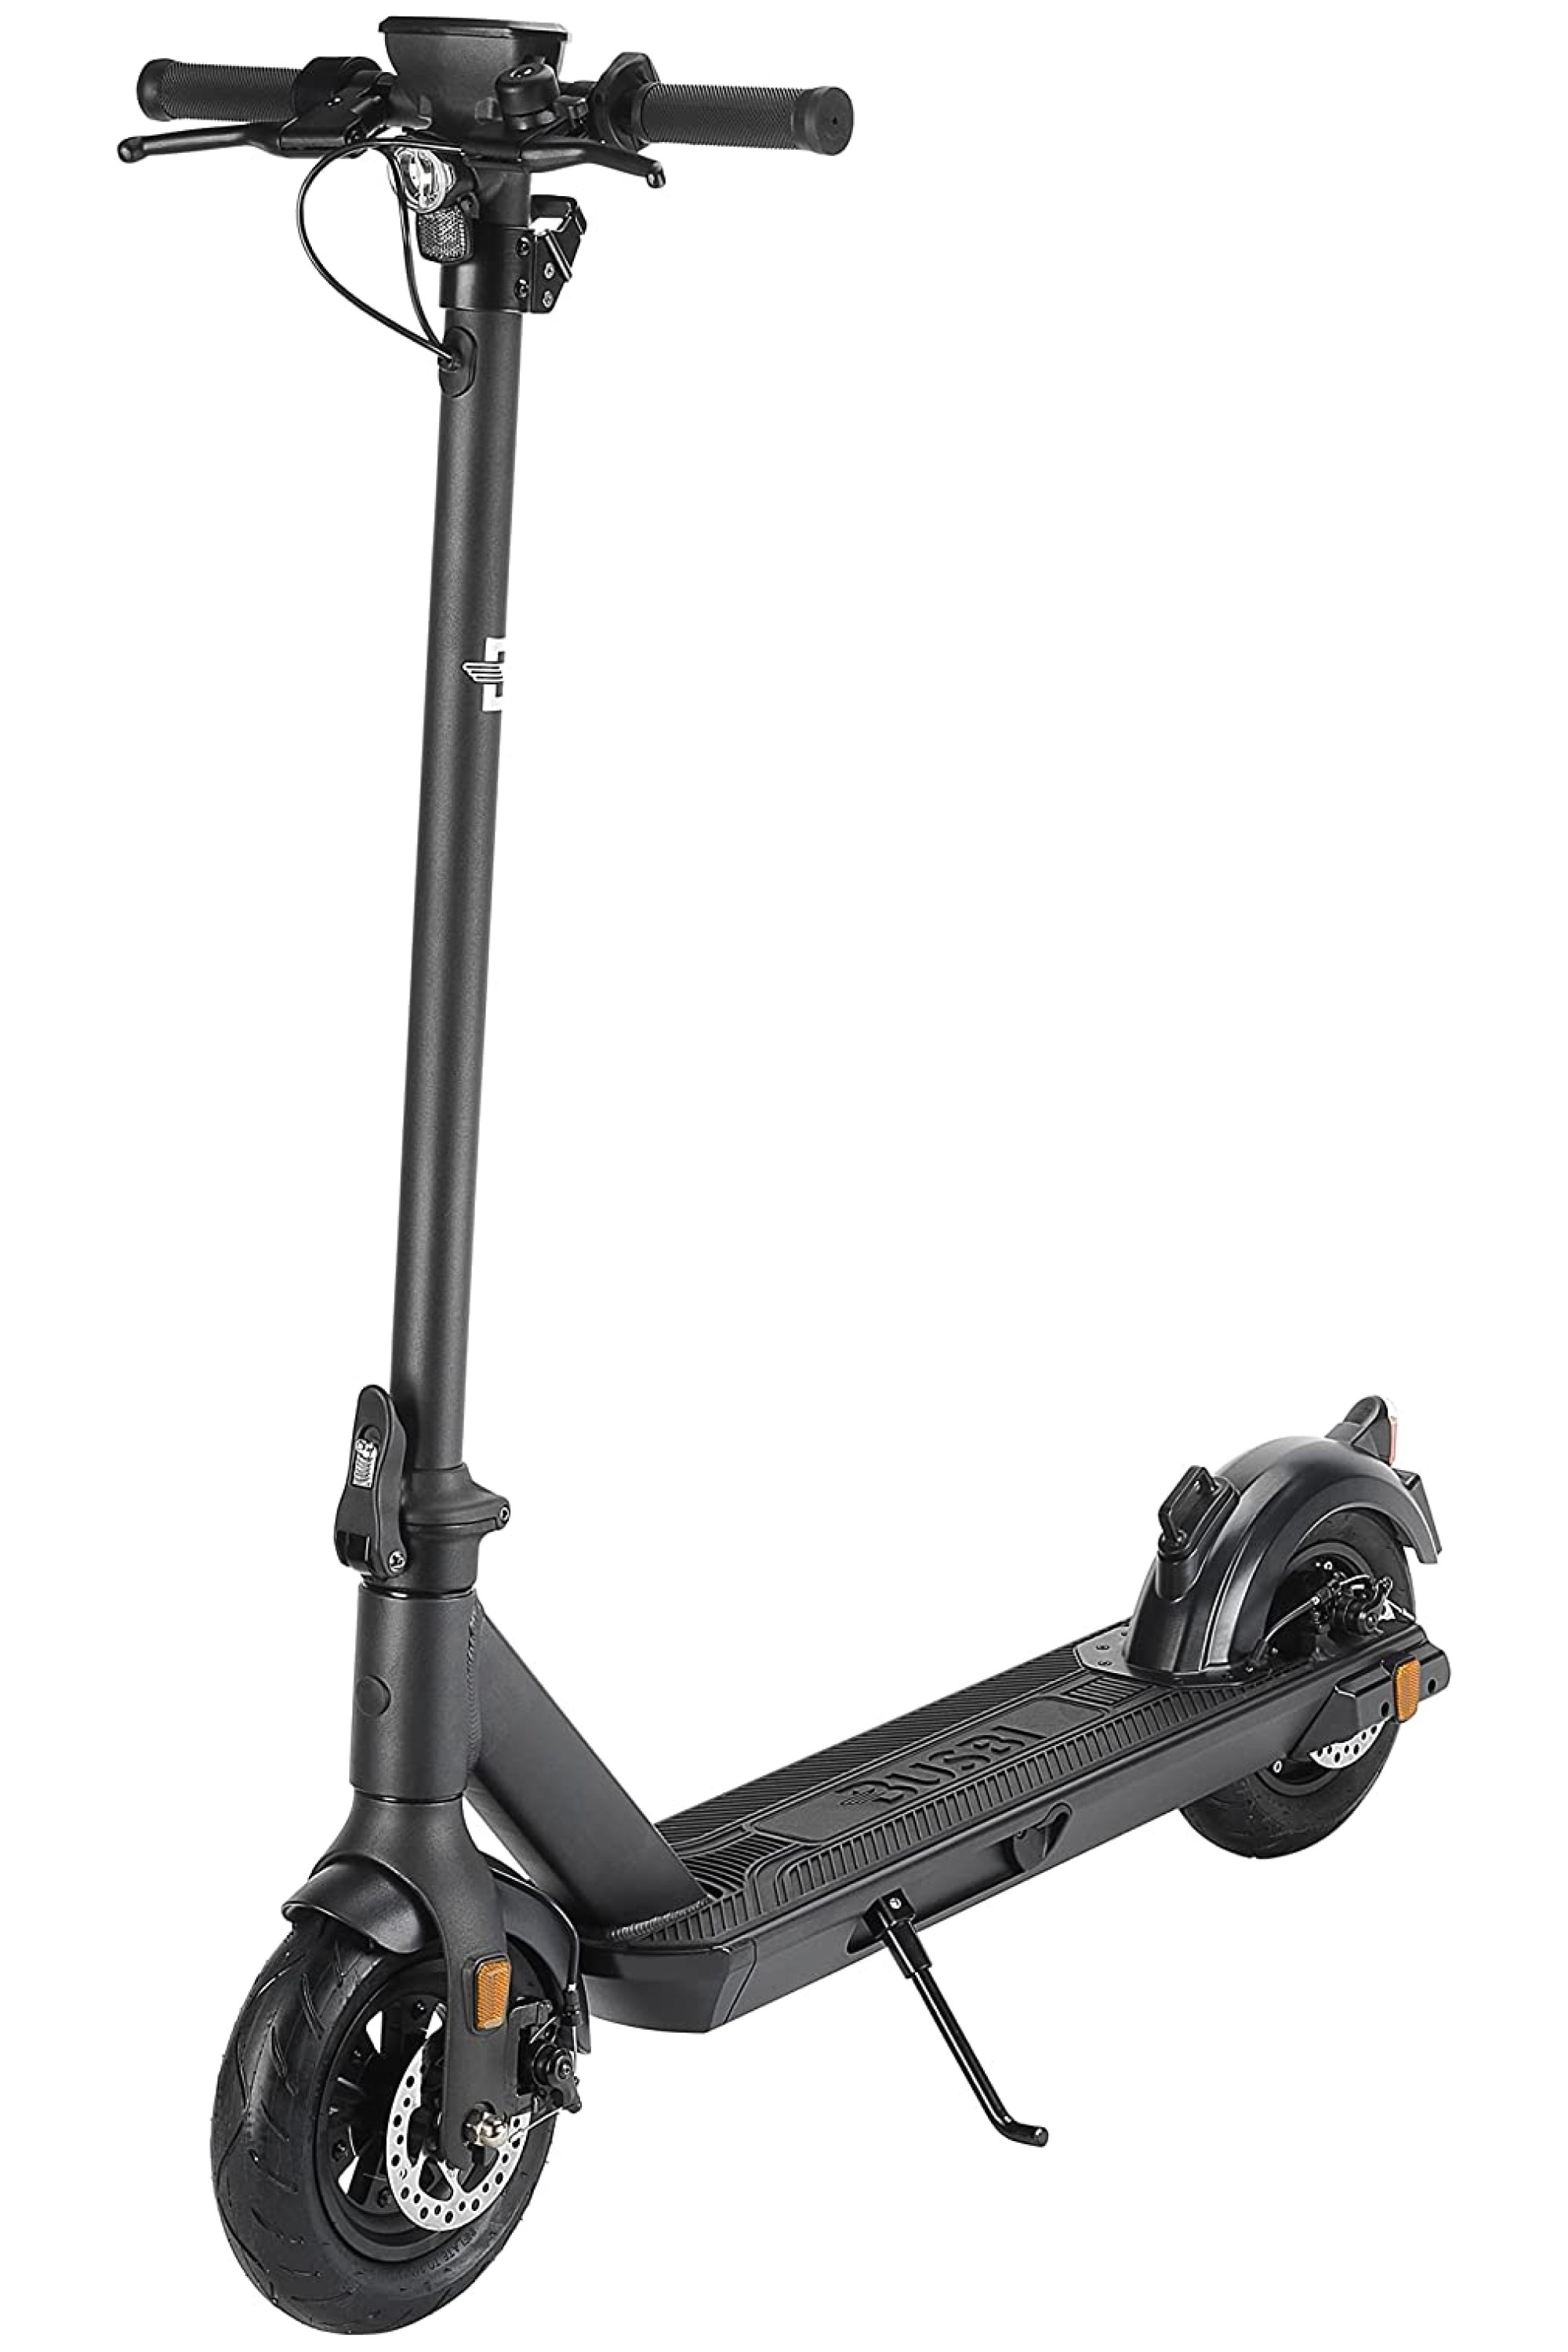 Busbi Hornet Foldable Adult Electric Scooter 300w -